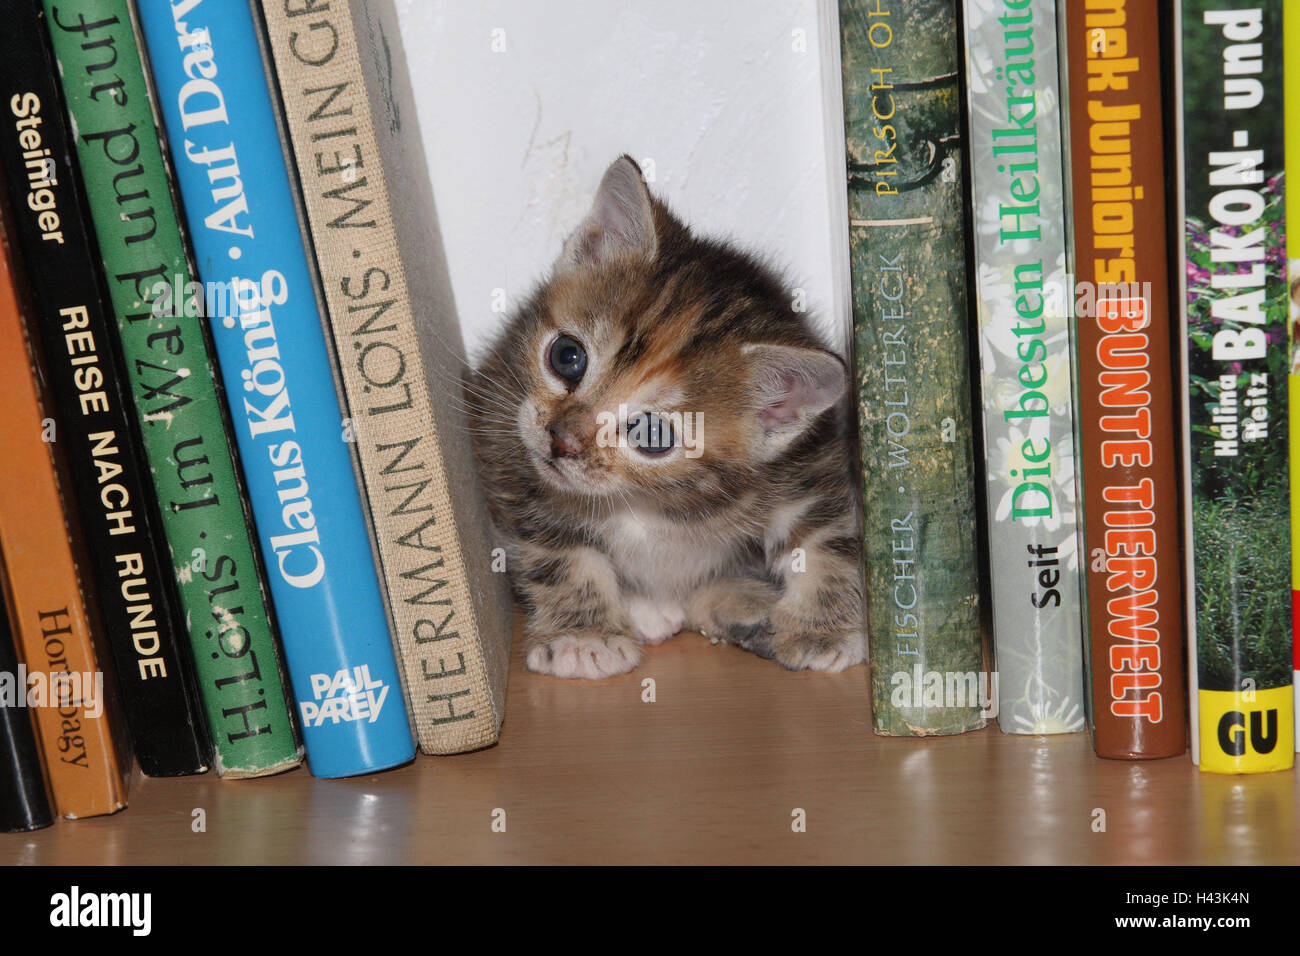 Shelf, cat, young, hide, books, bookshelf, animals, mammals, pets, small cats, Felidae, domesticates, house cat, young animal, kitten, small, awkward, clumsy, sit, play curiosity, under, hiding place, sweetly, individually, alone, striped, young animals, animal baby, inside, Stock Photo